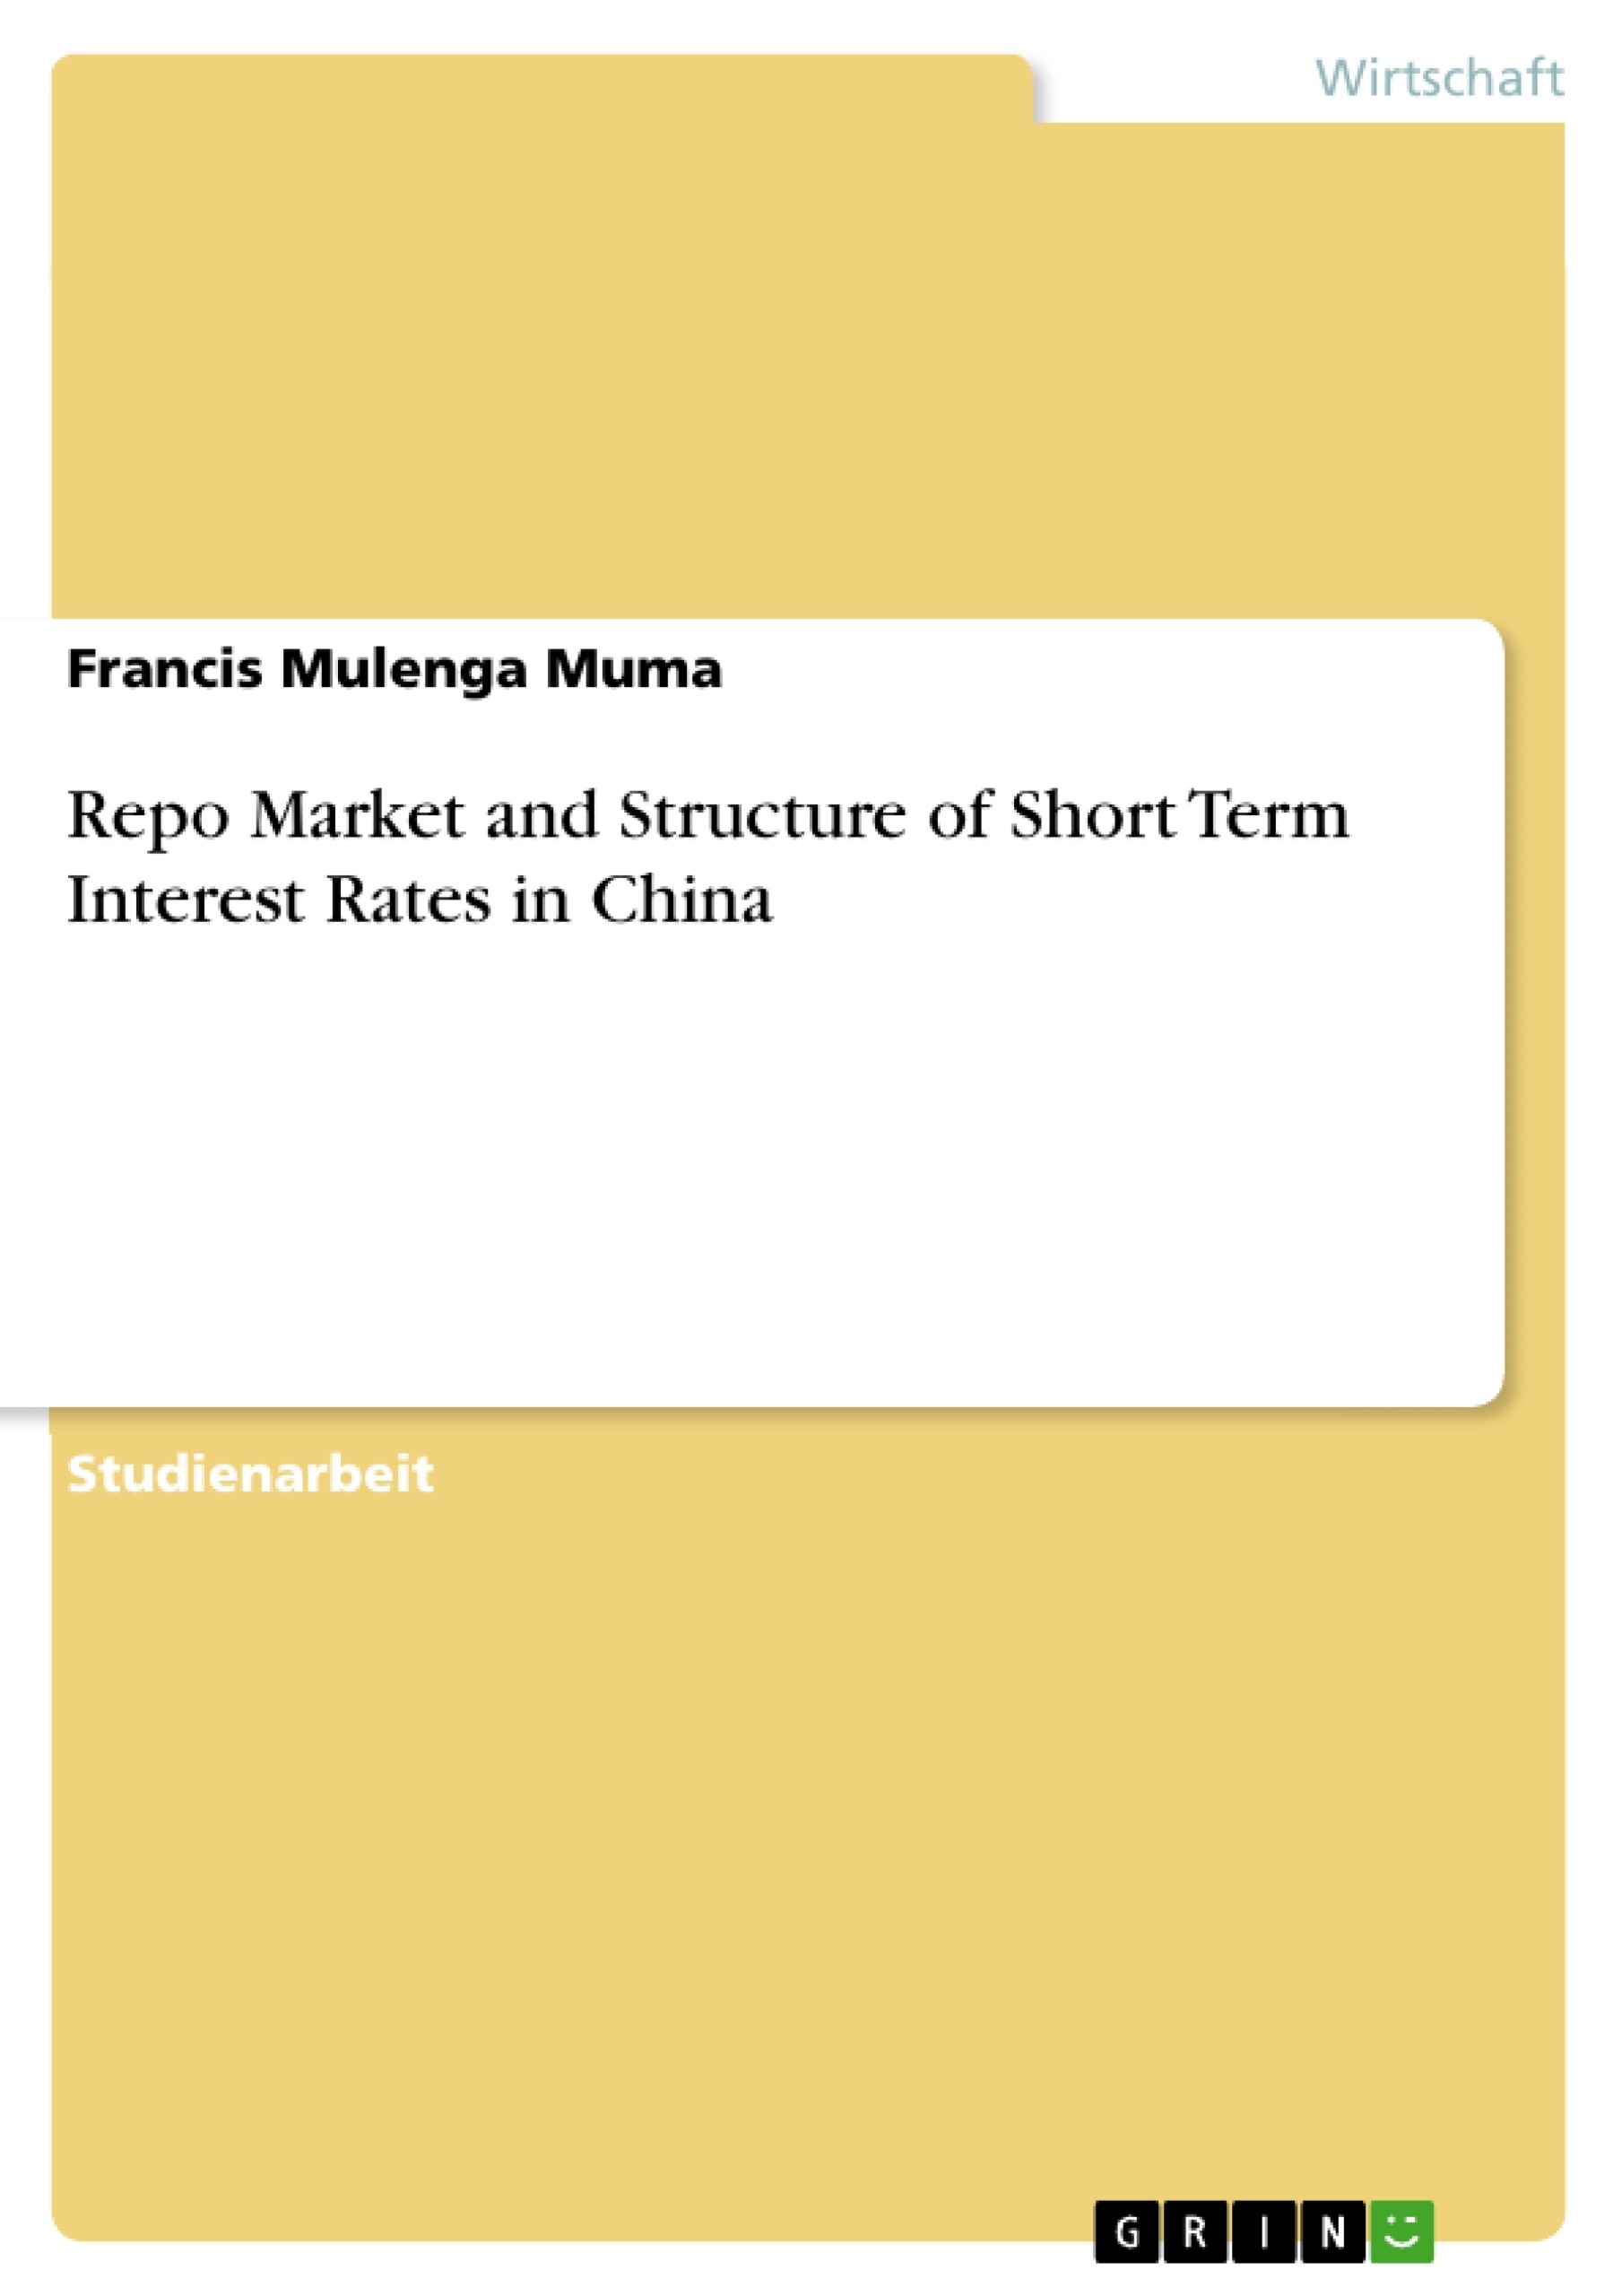 Titel: Repo Market and Structure of Short Term Interest Rates in China